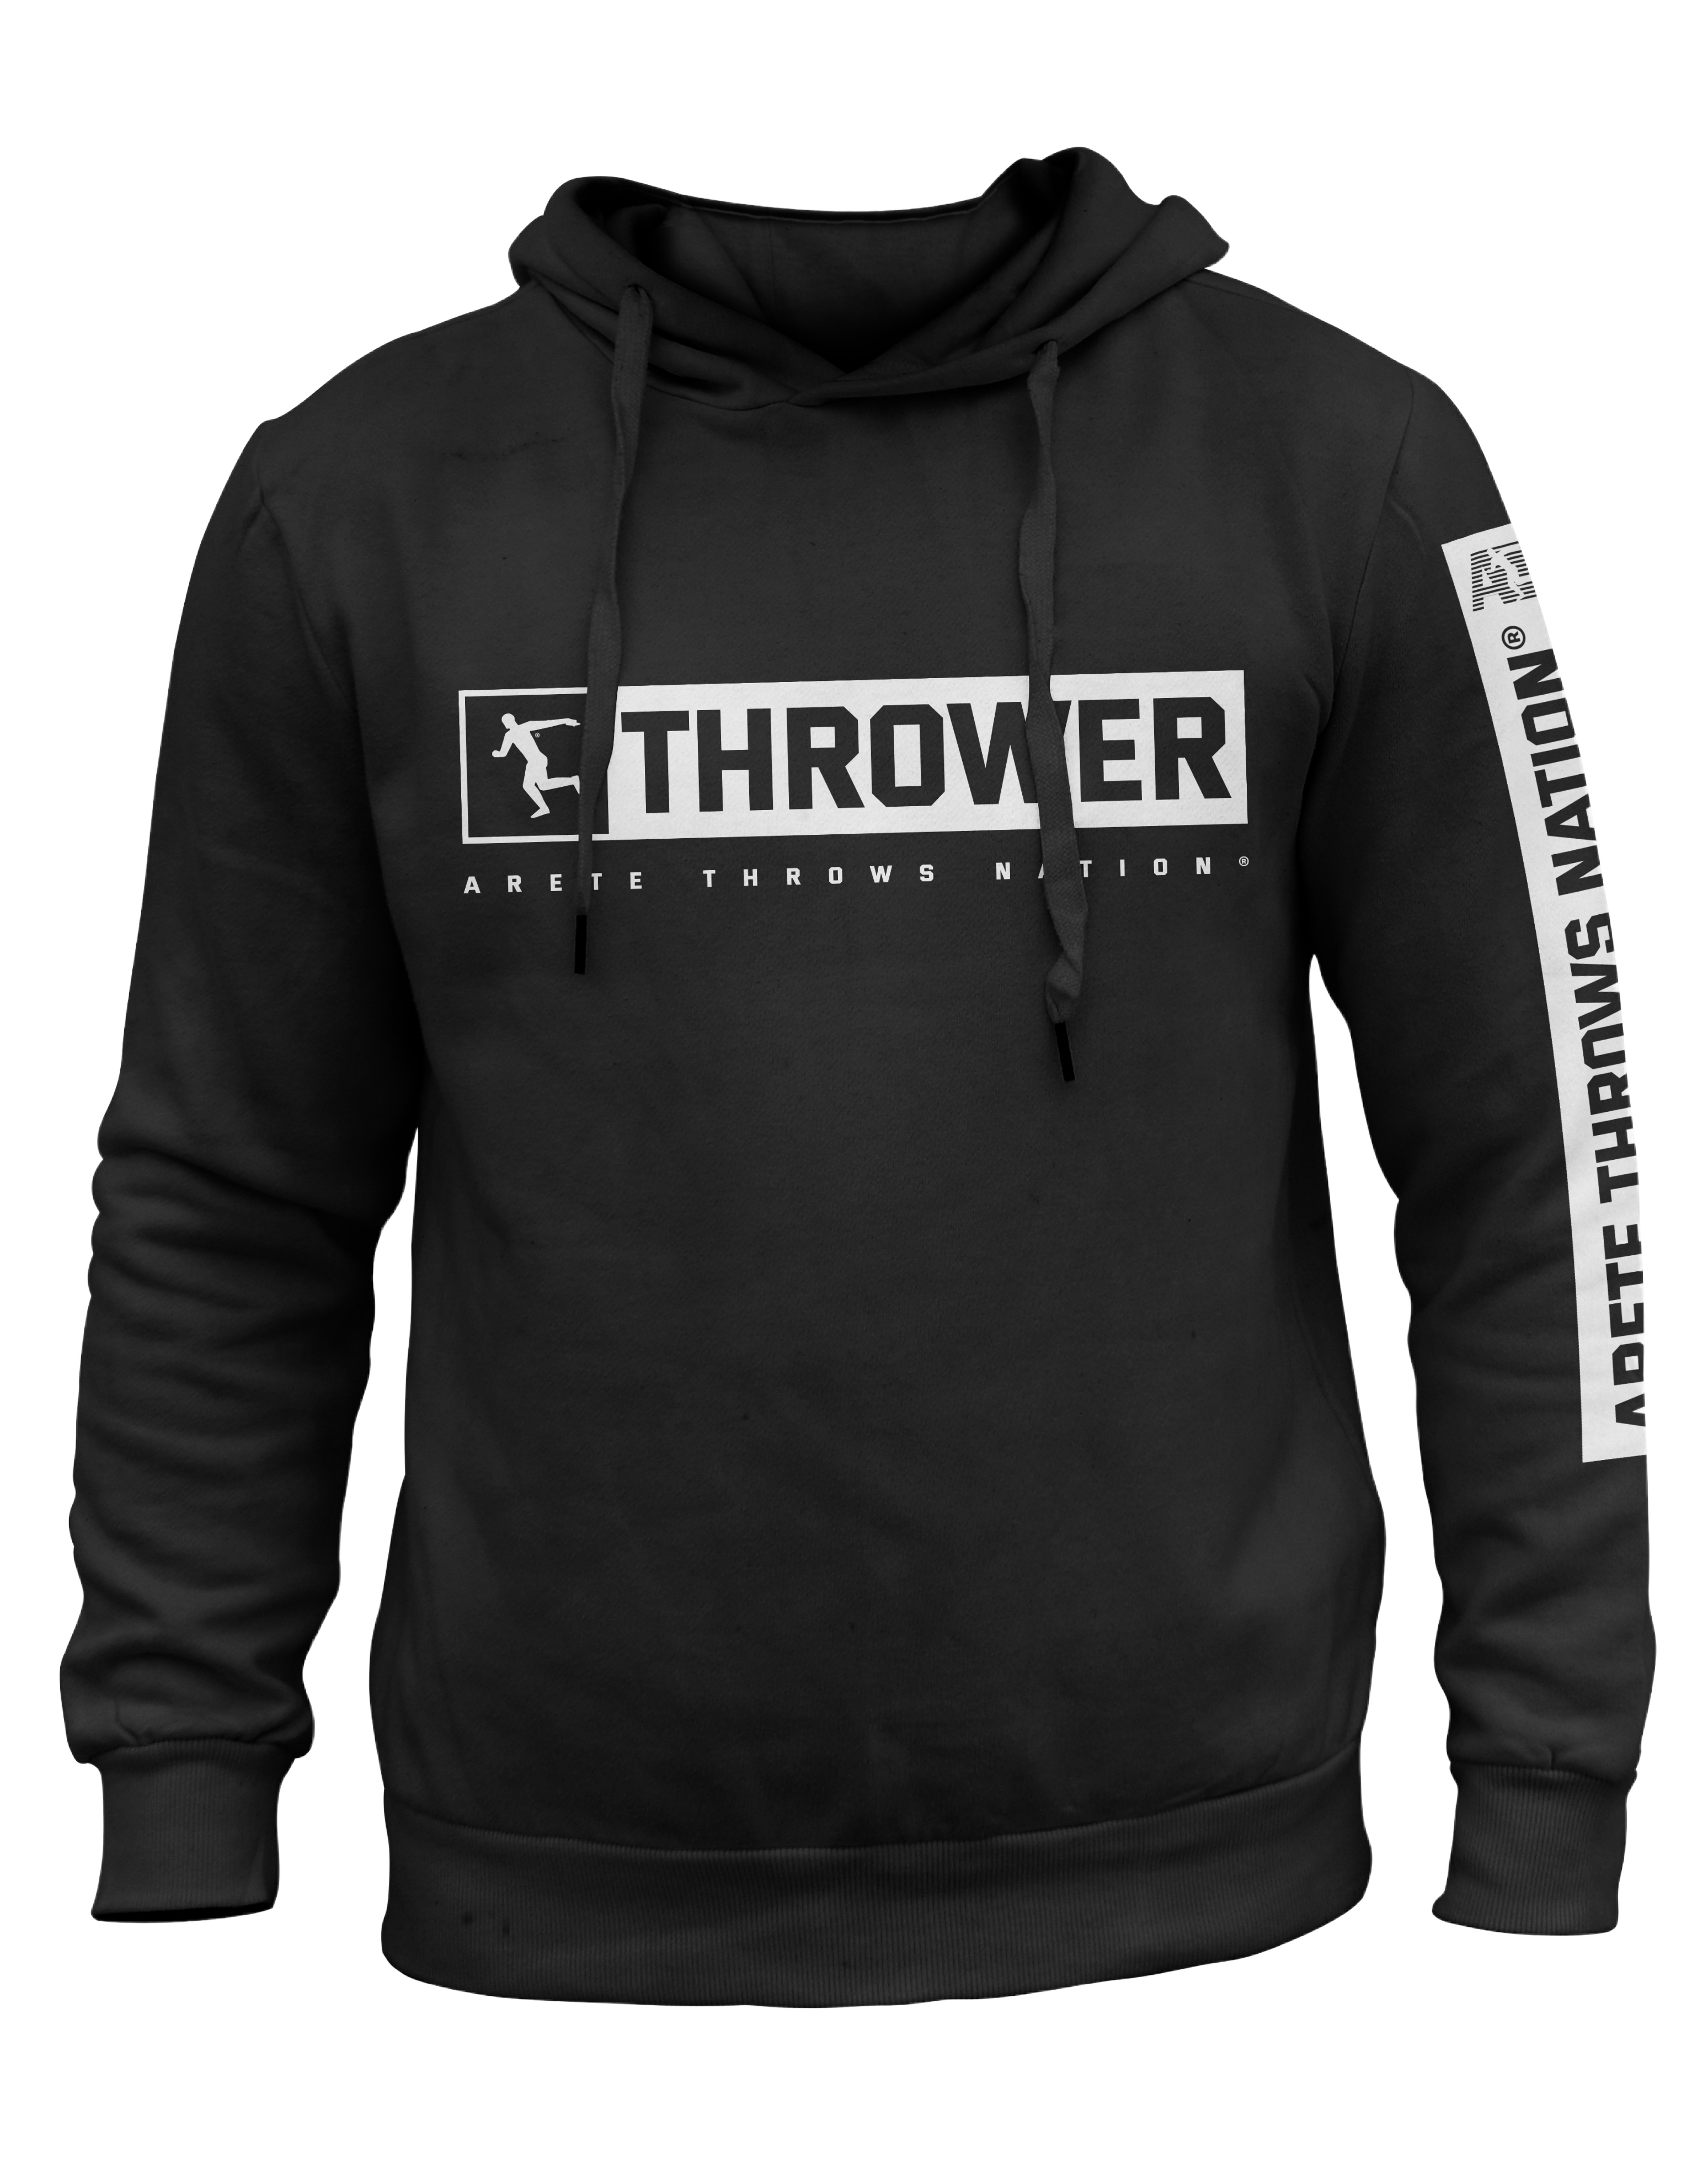 Arete Throws Nation hoodie